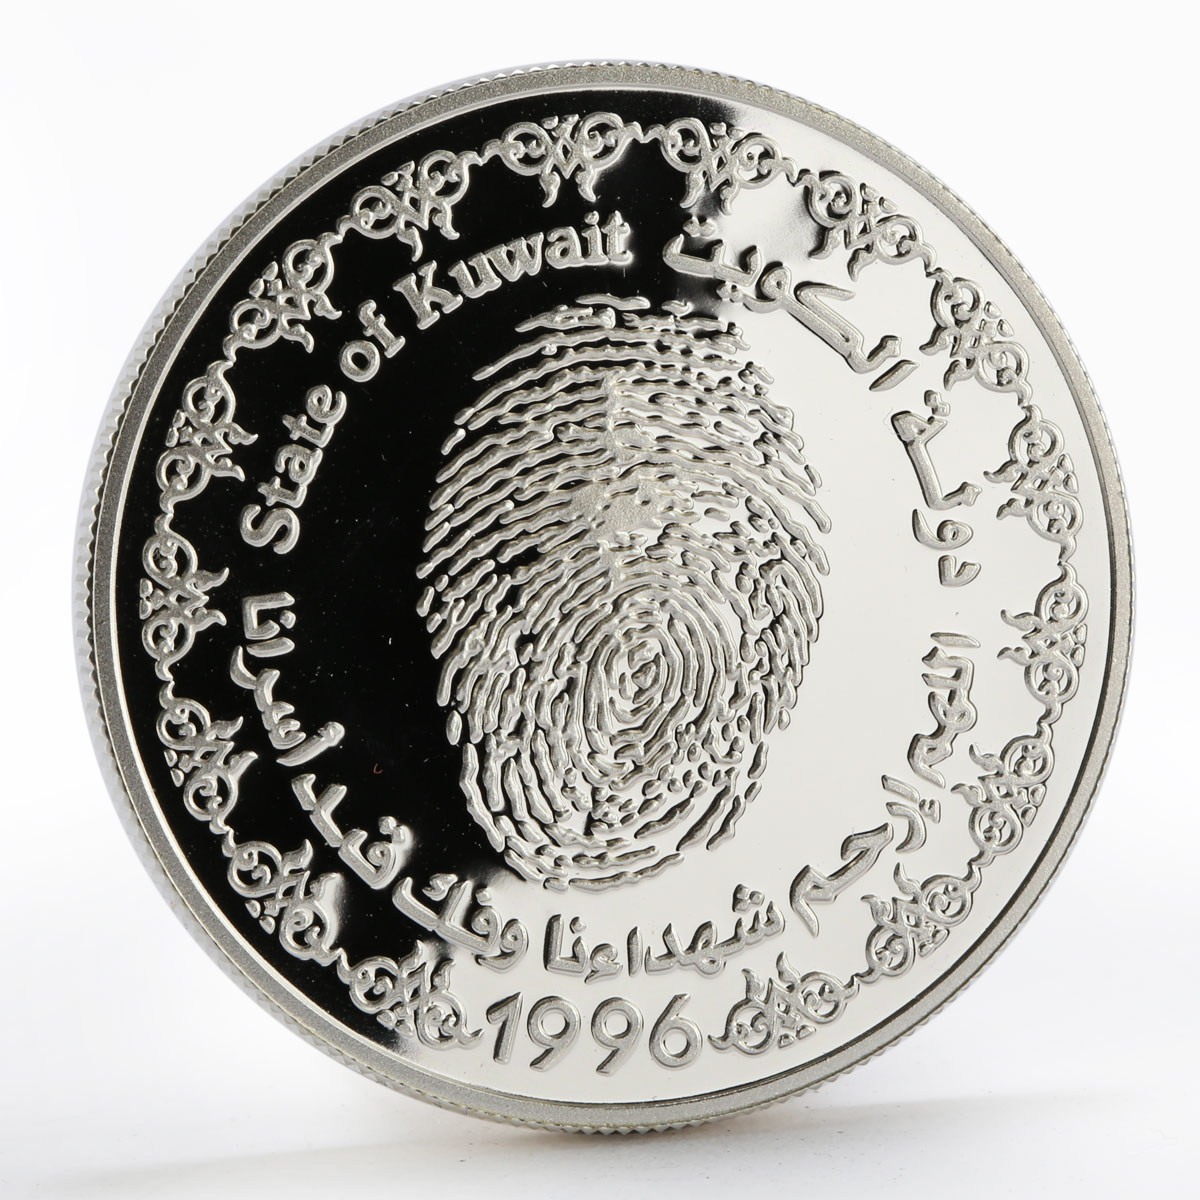 Kuwait 5 dinar Liberation Day 5th Anniversary proof silver coin 1996